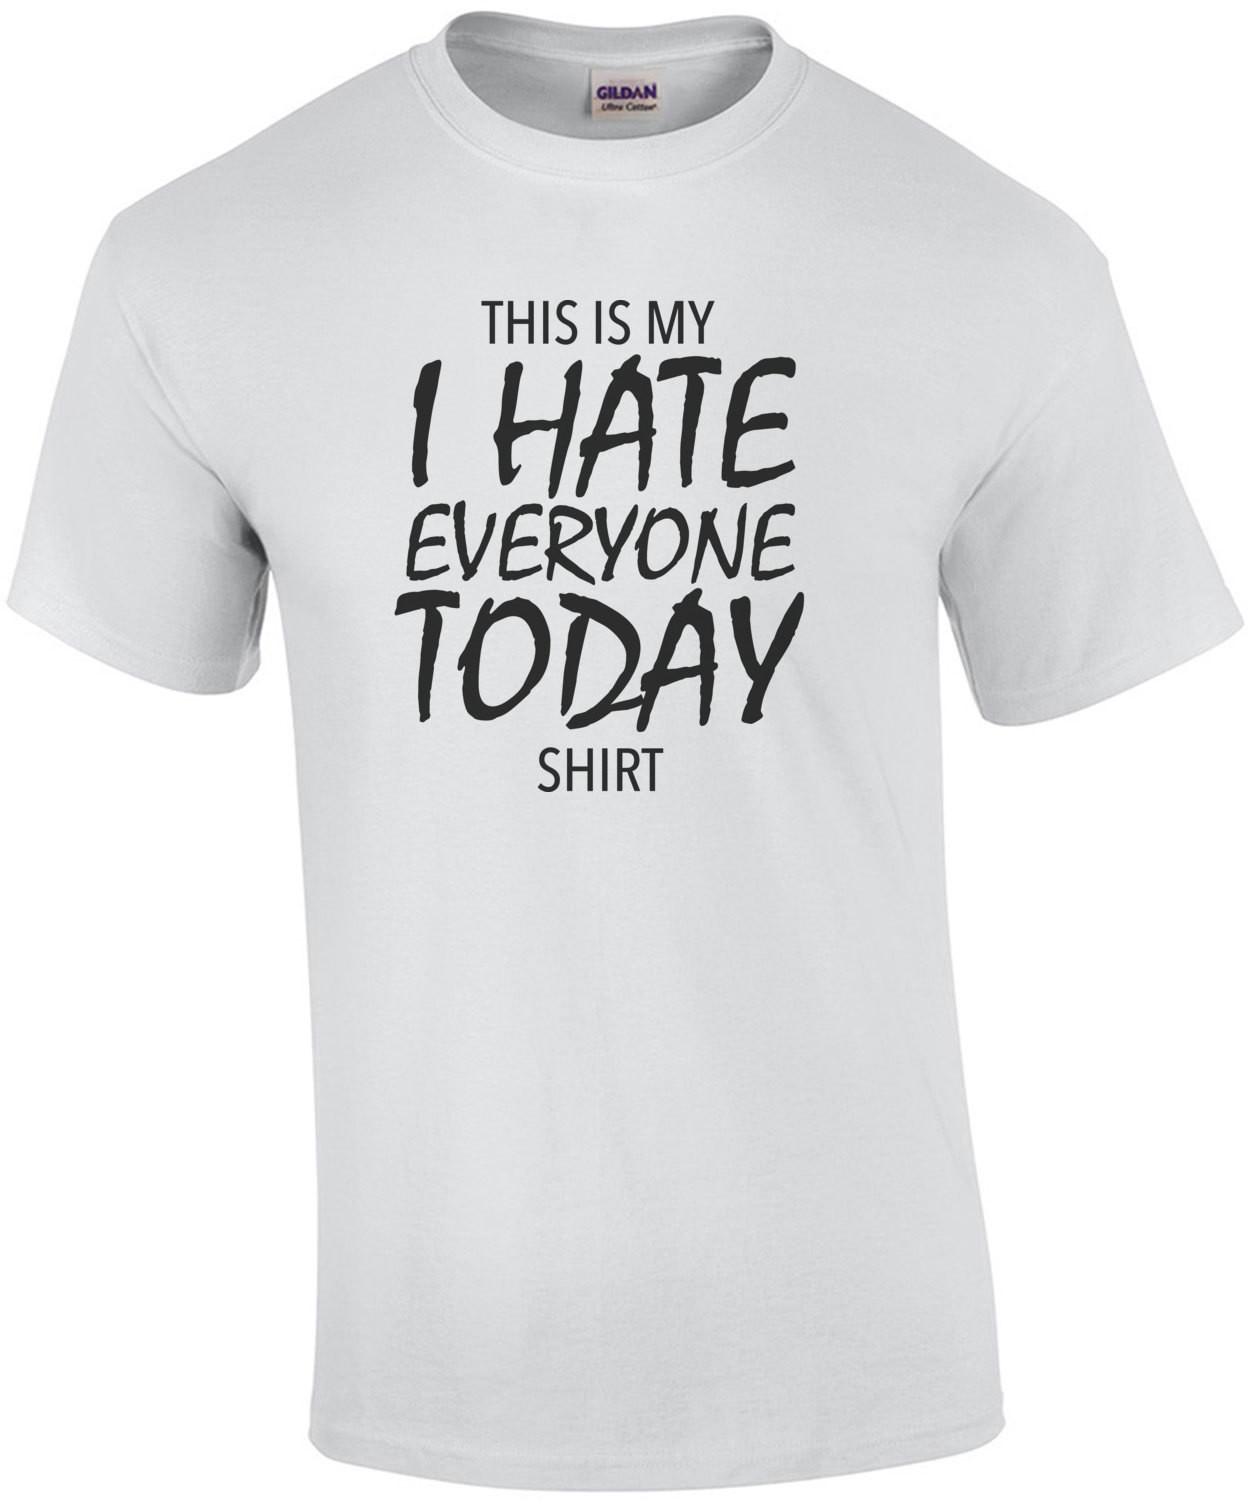 This is my I hate everyone today shirt - funny t-shirt